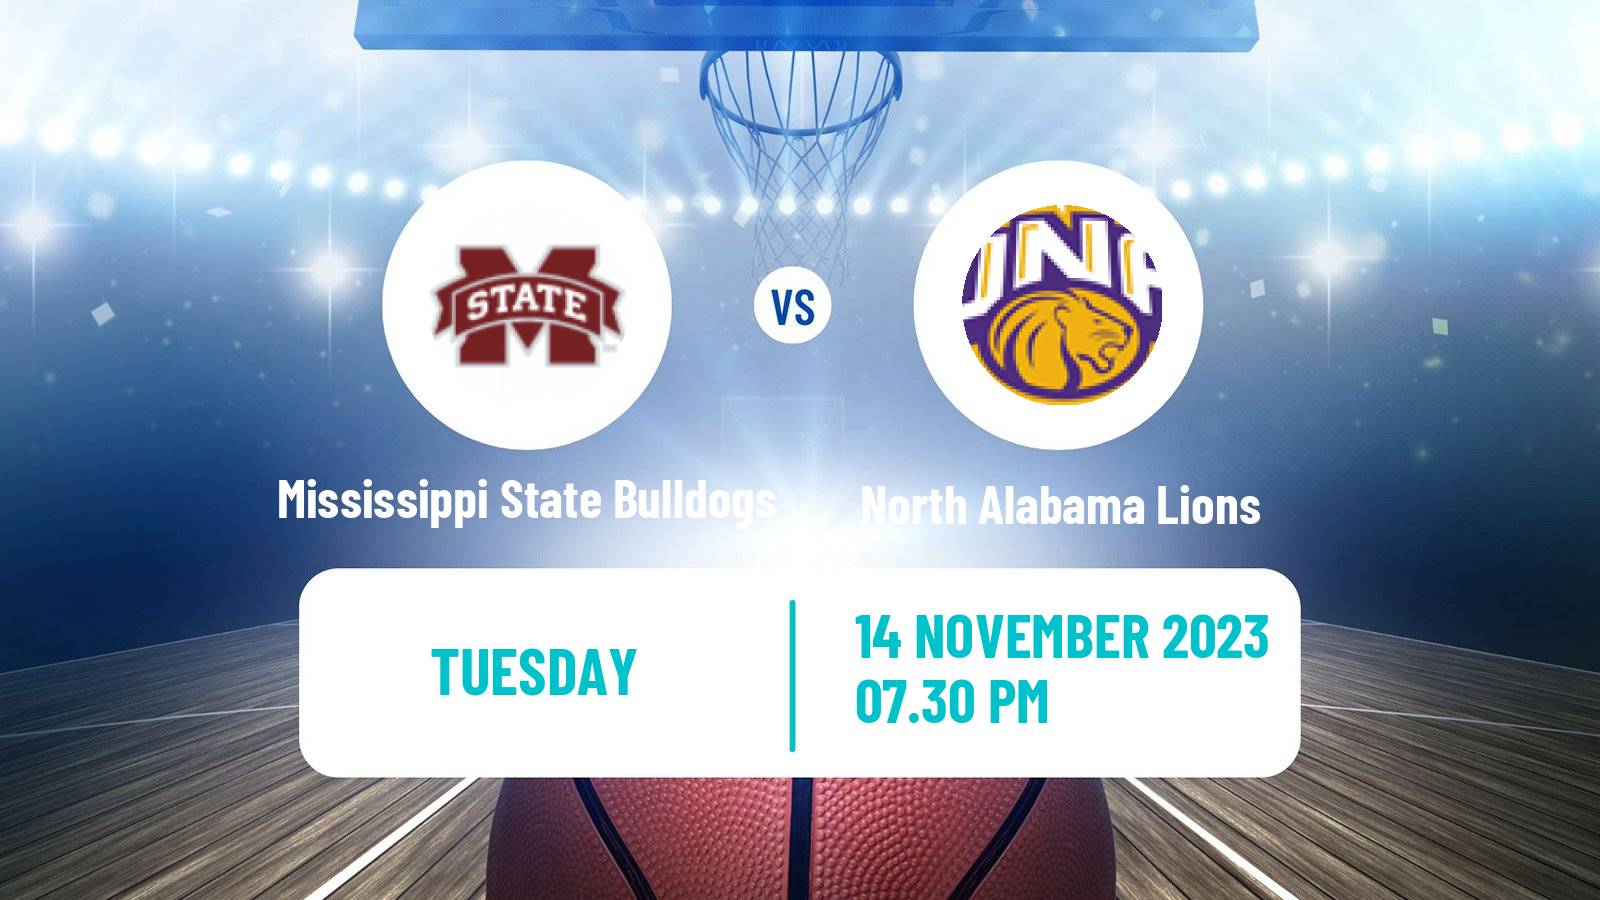 Basketball NCAA College Basketball Mississippi State Bulldogs - North Alabama Lions